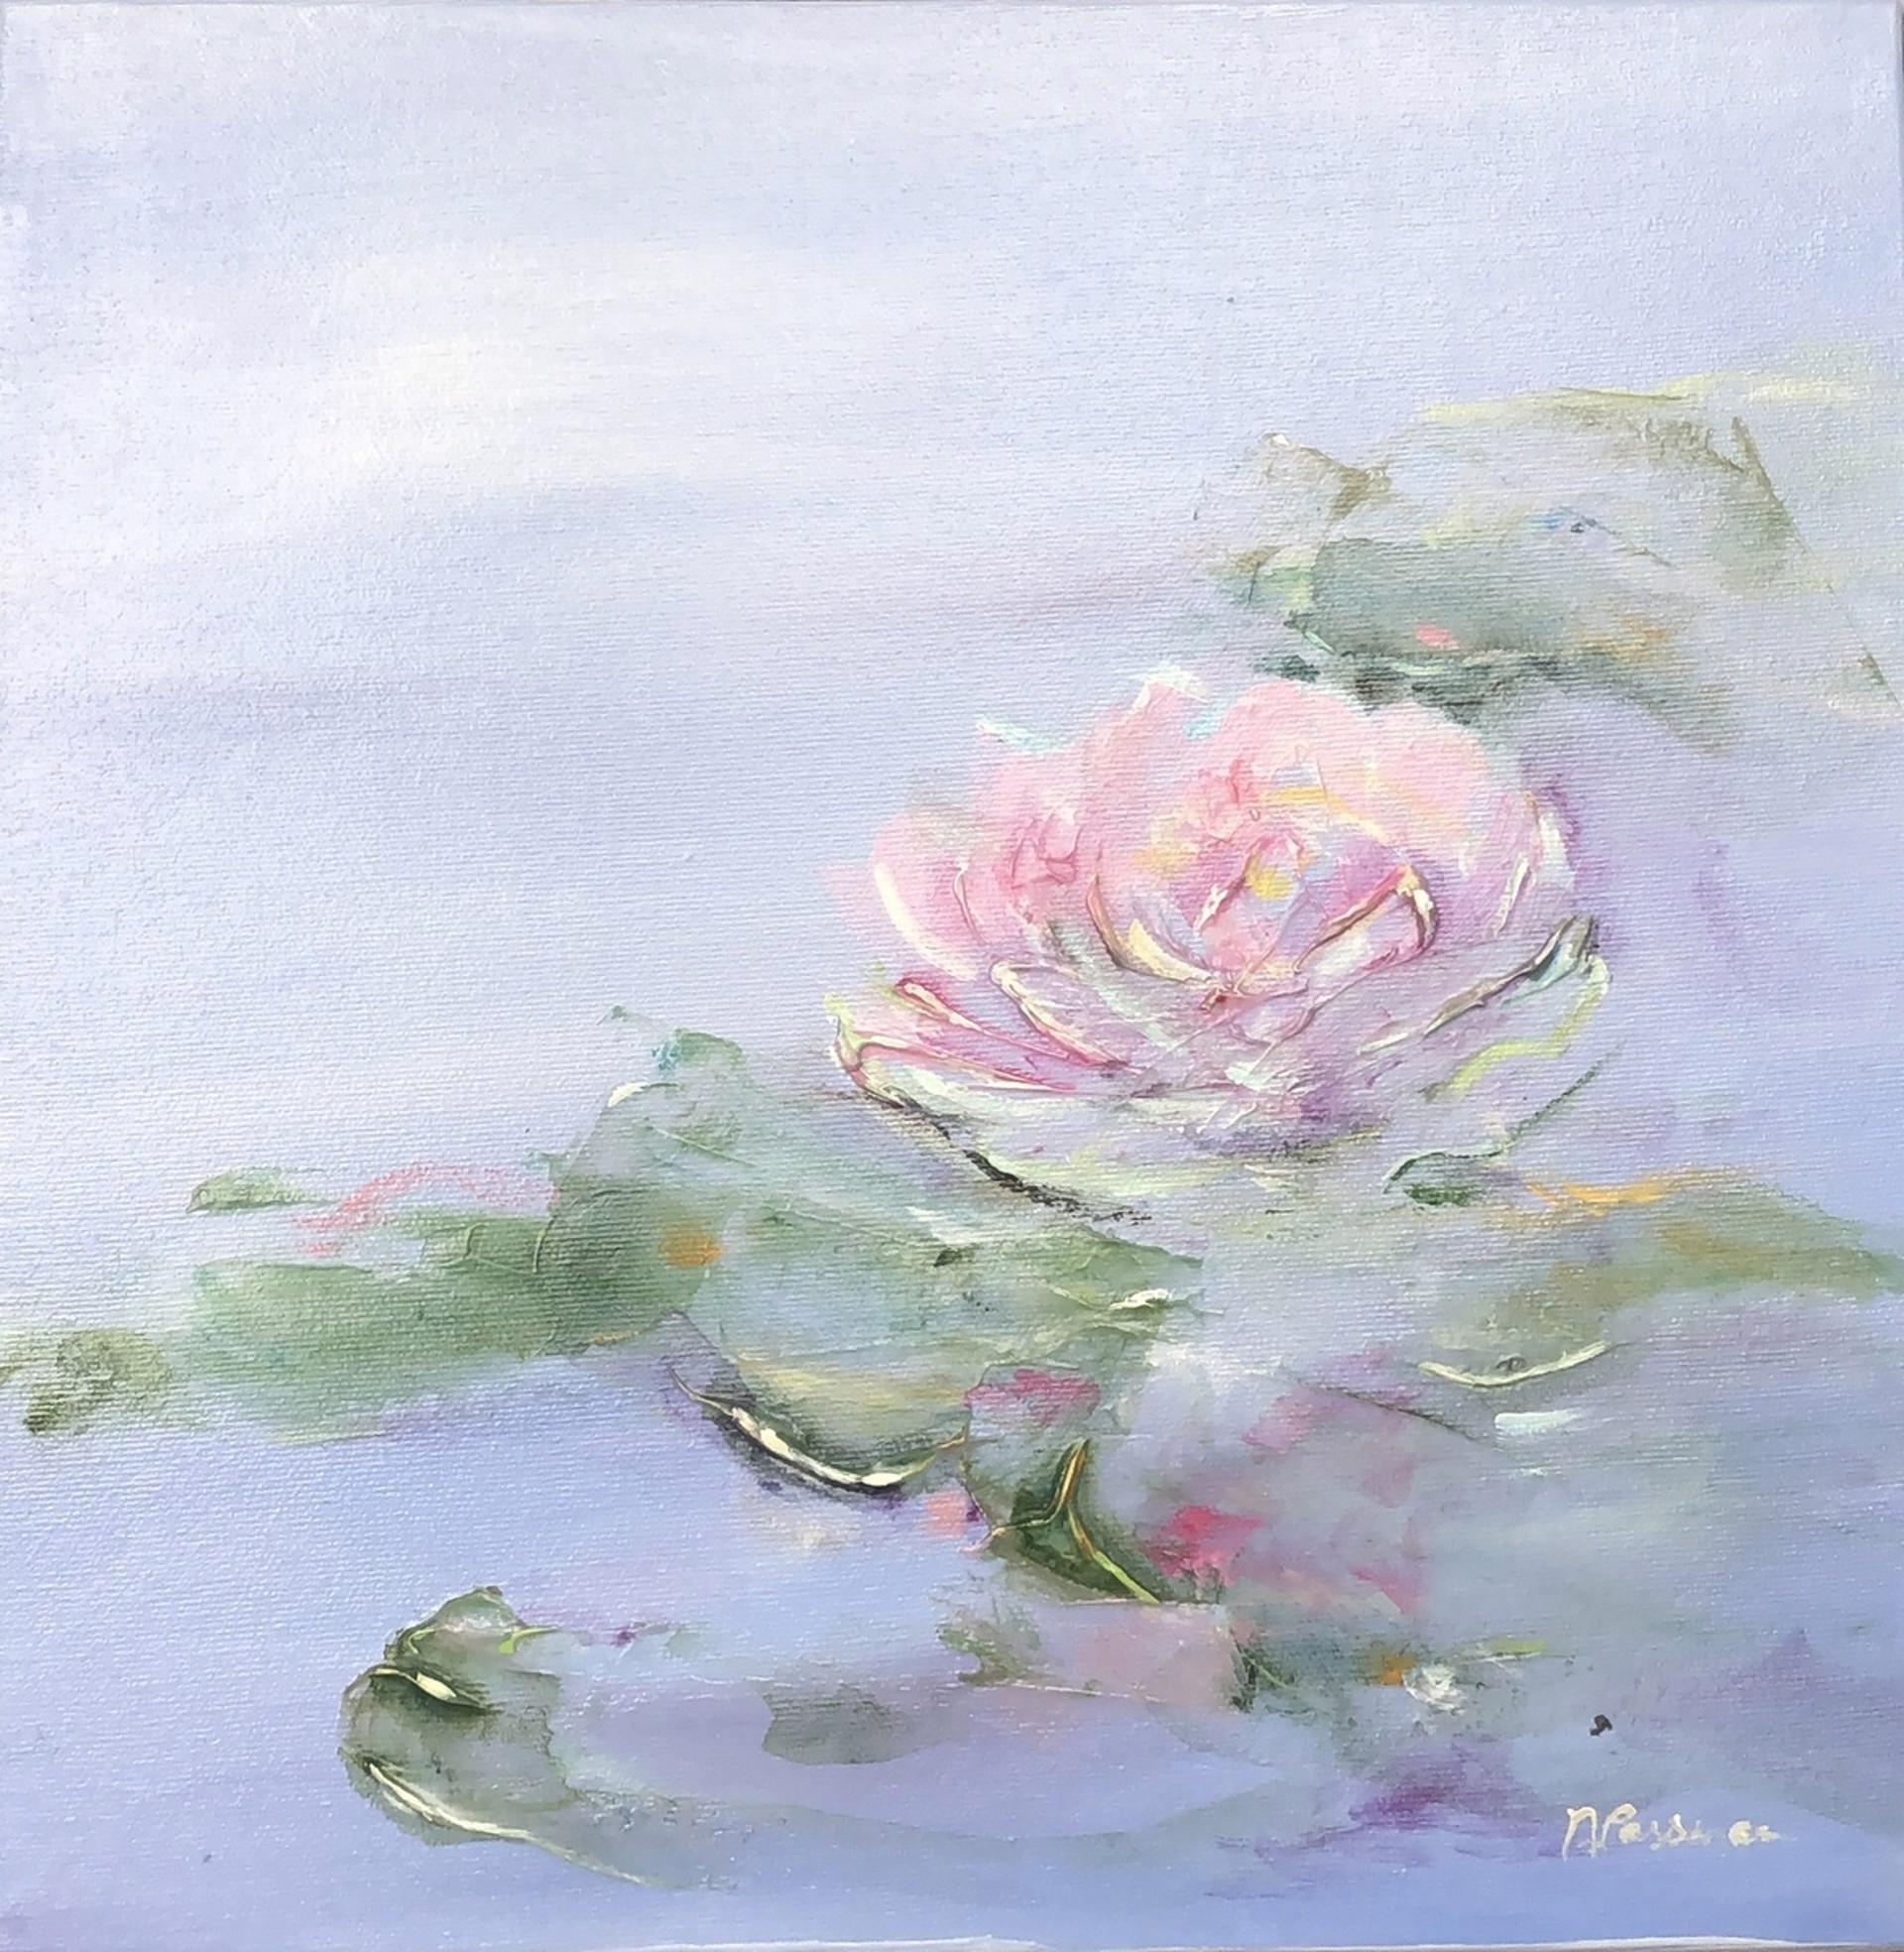 Soft Lily in the Pond by Nadia Lassman